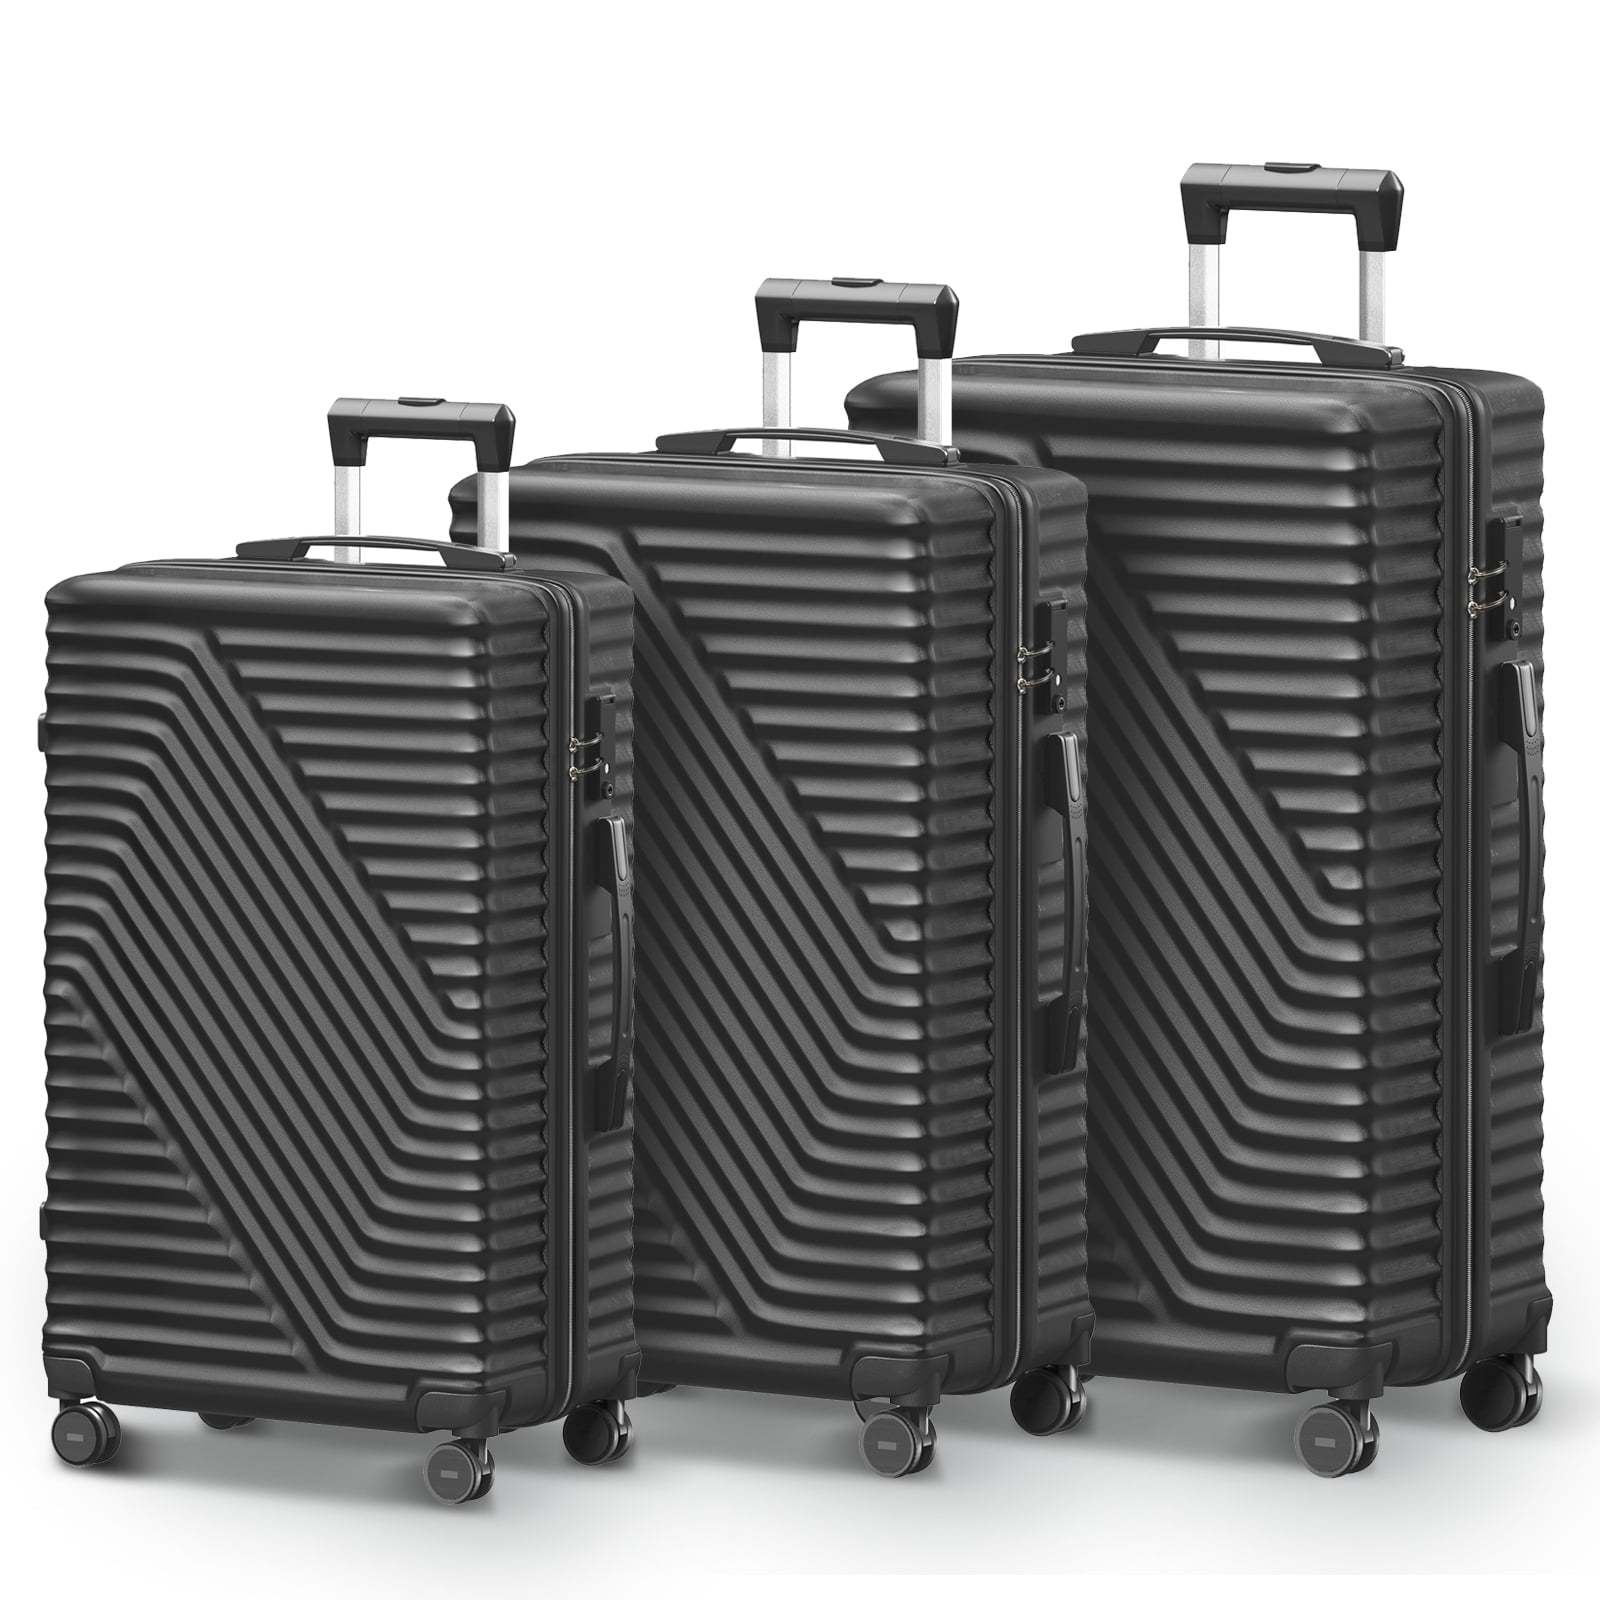 Hardshell Luggage Sets 3 Piece Double Spinner Wheels black-abs+pc